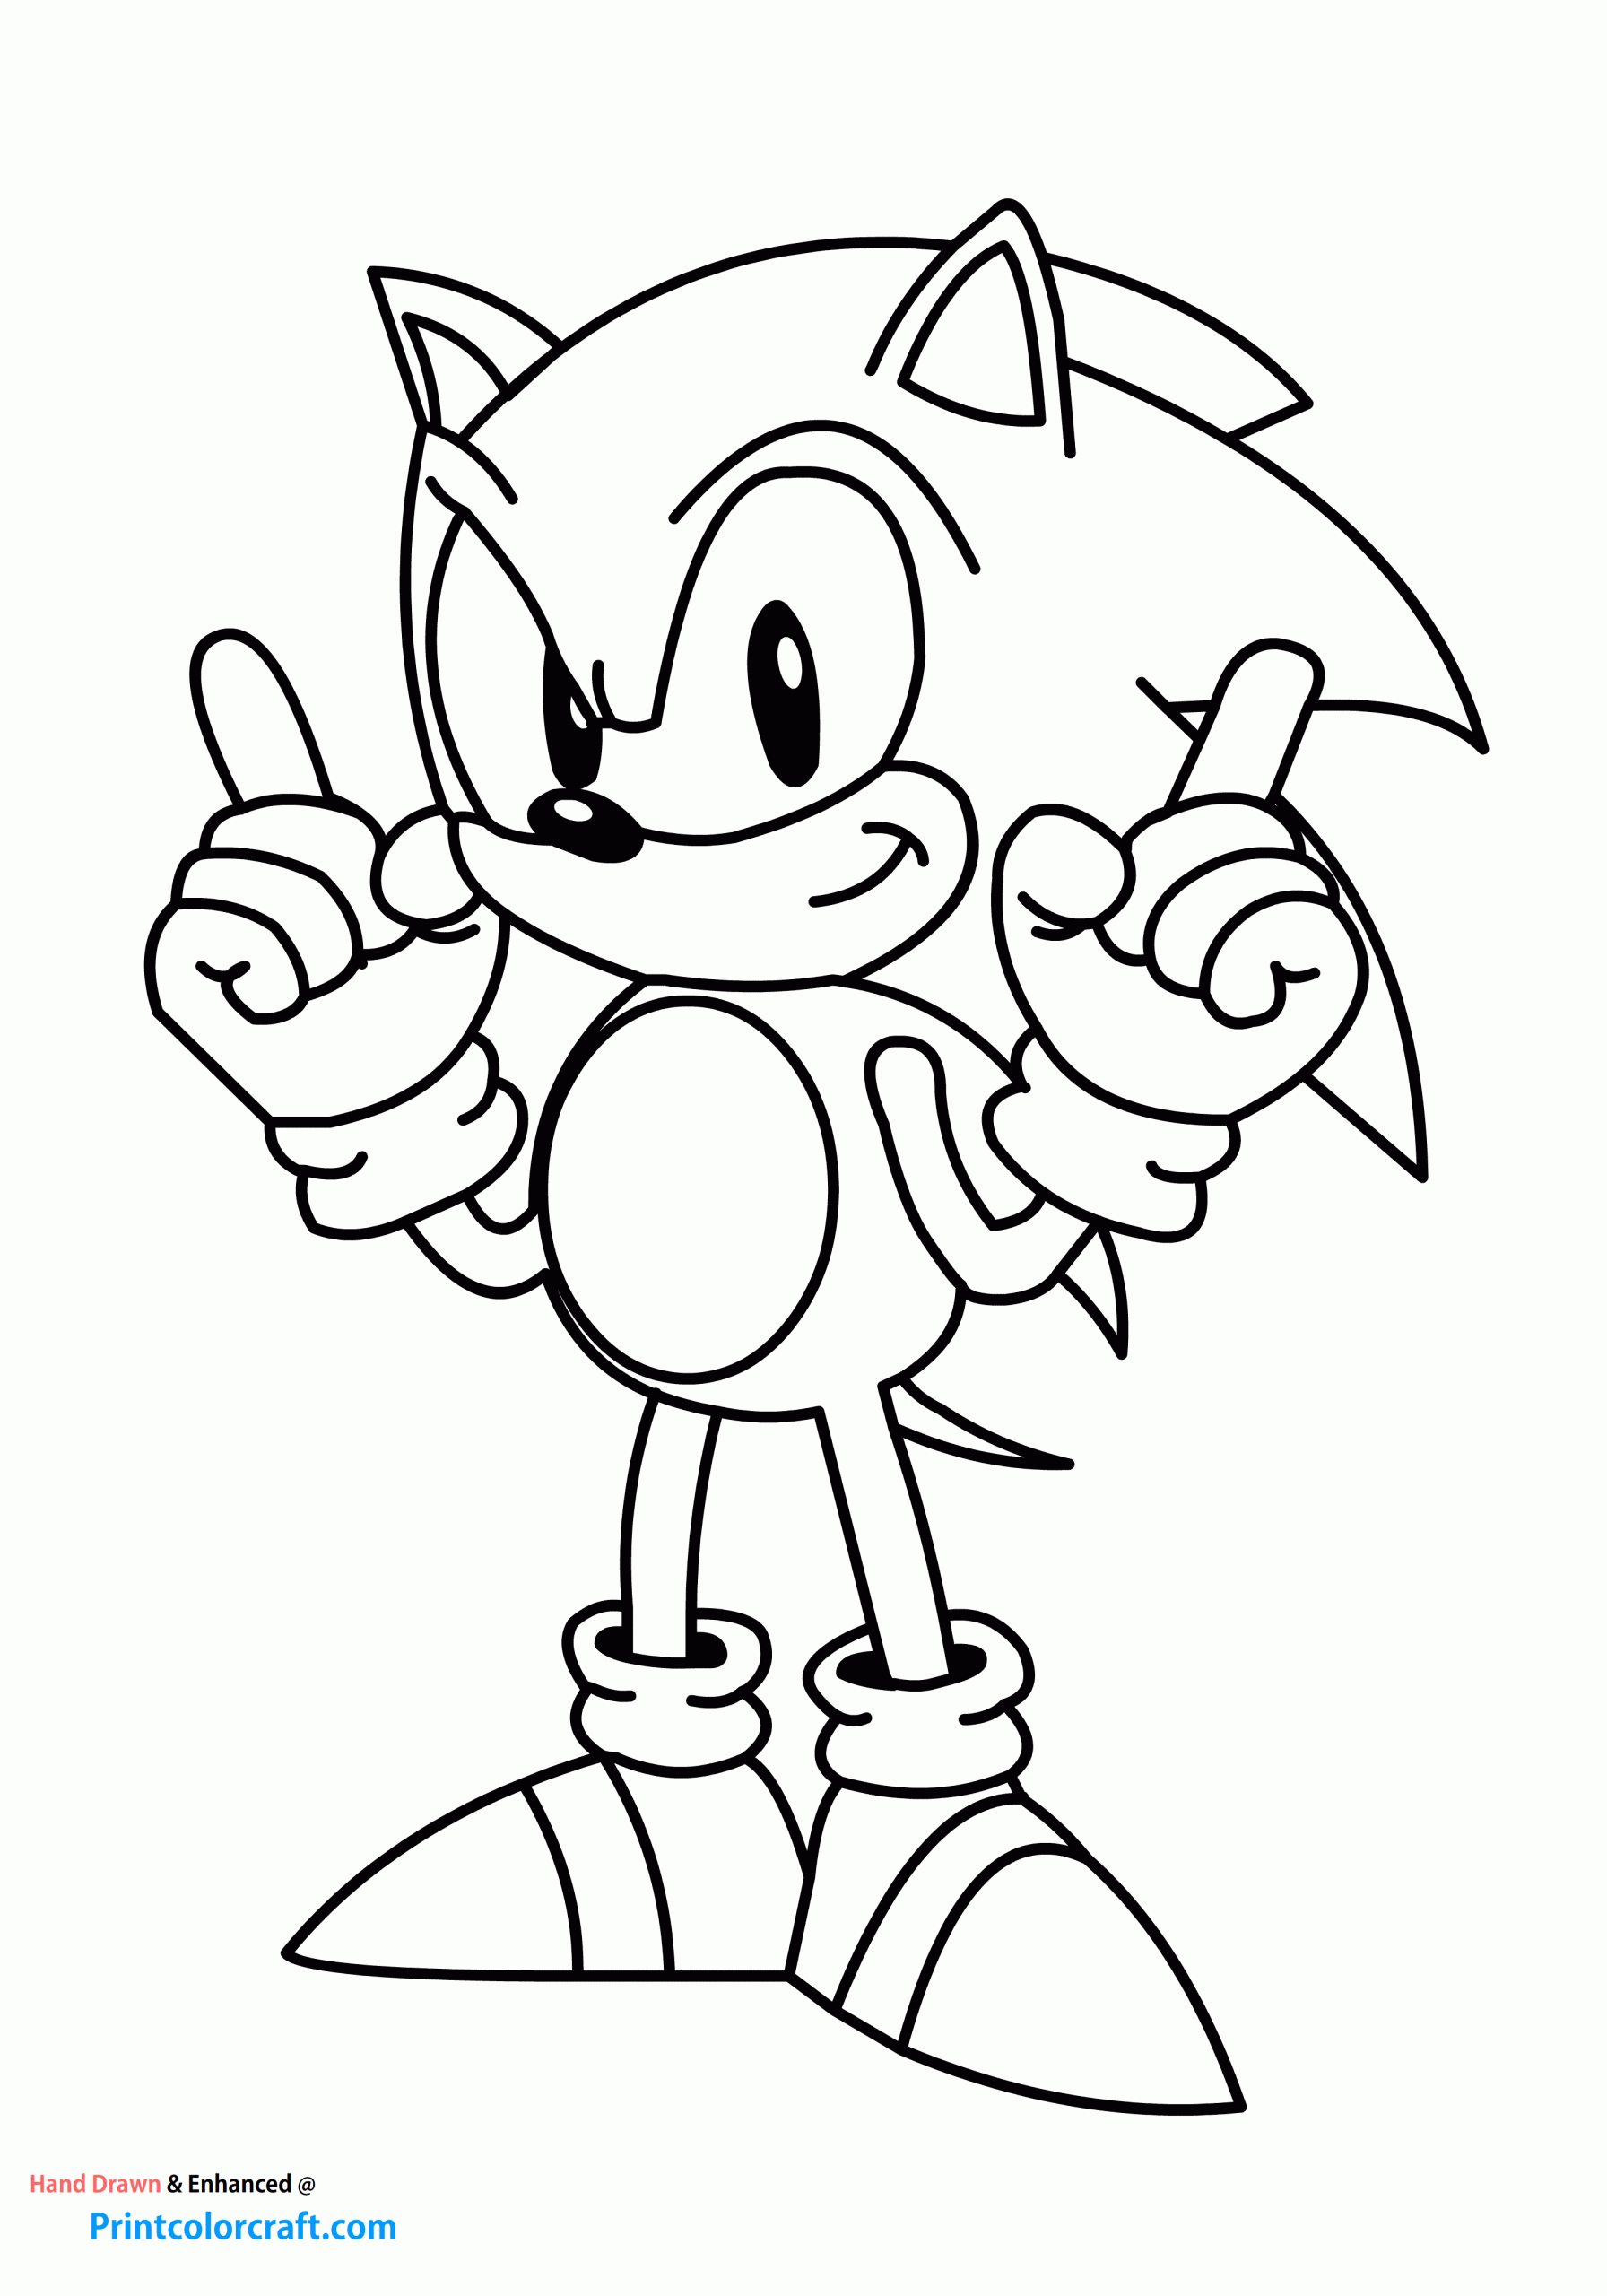 Printable Sonic Coloring Pages Sega Sonic the Hedgehog